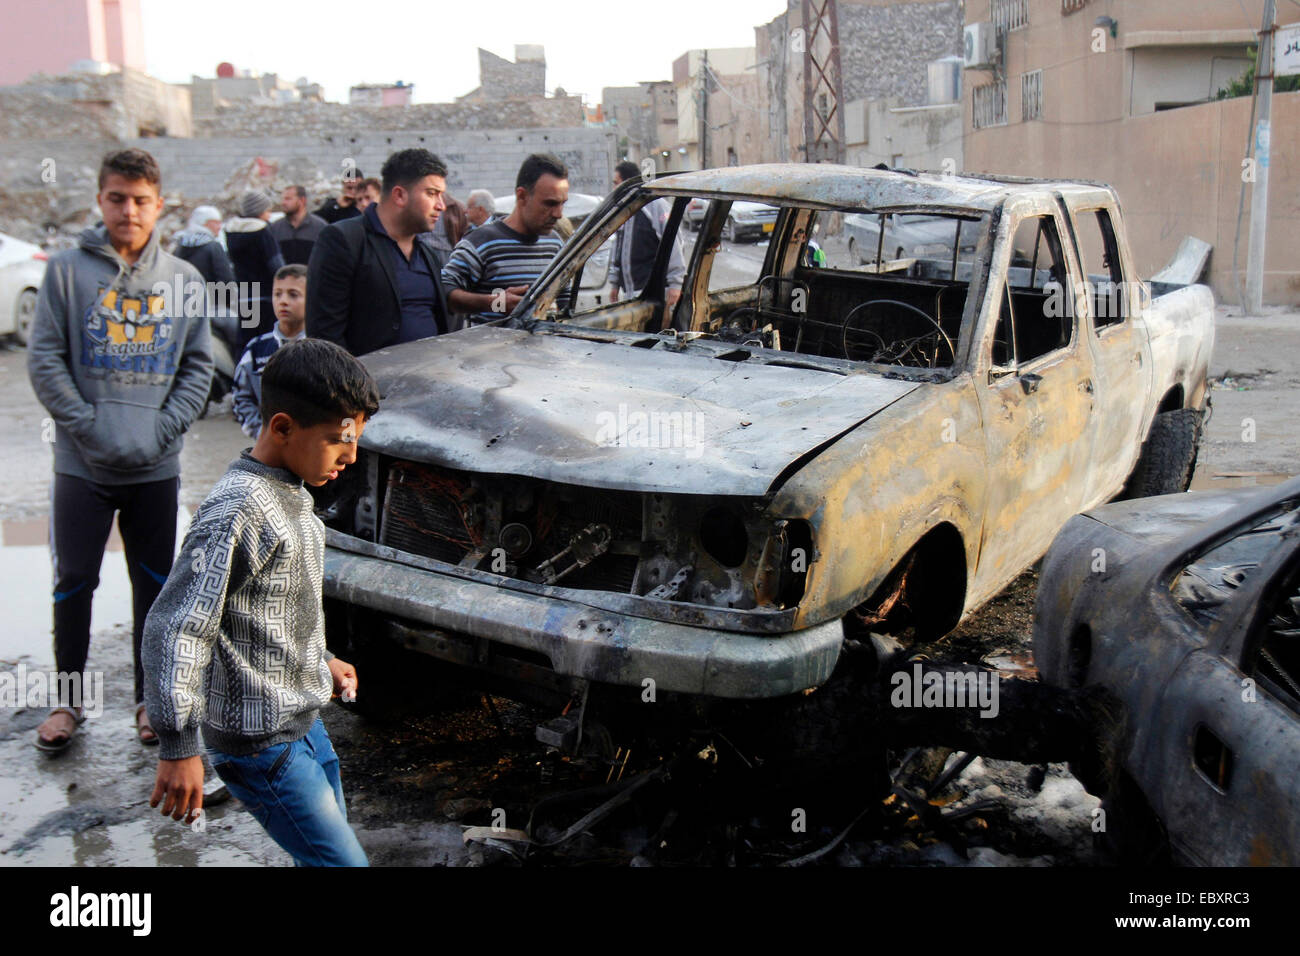 Kirkuk, Iraq. 5th Dec, 2014. A damaged car is seen at an explosion site in the city of Kirkuk, Iraq, Dec 5, 2014. A suicide bomber with an explosive vest blew himself up in a cafe in the northern Iraqi city of Kirkuk, killing at least 15 people and wounding 20 others on Dec. 4, a local police told Xinhua on condition of anonymity. © Dena Assad/Xinhua/Alamy Live News Stock Photo